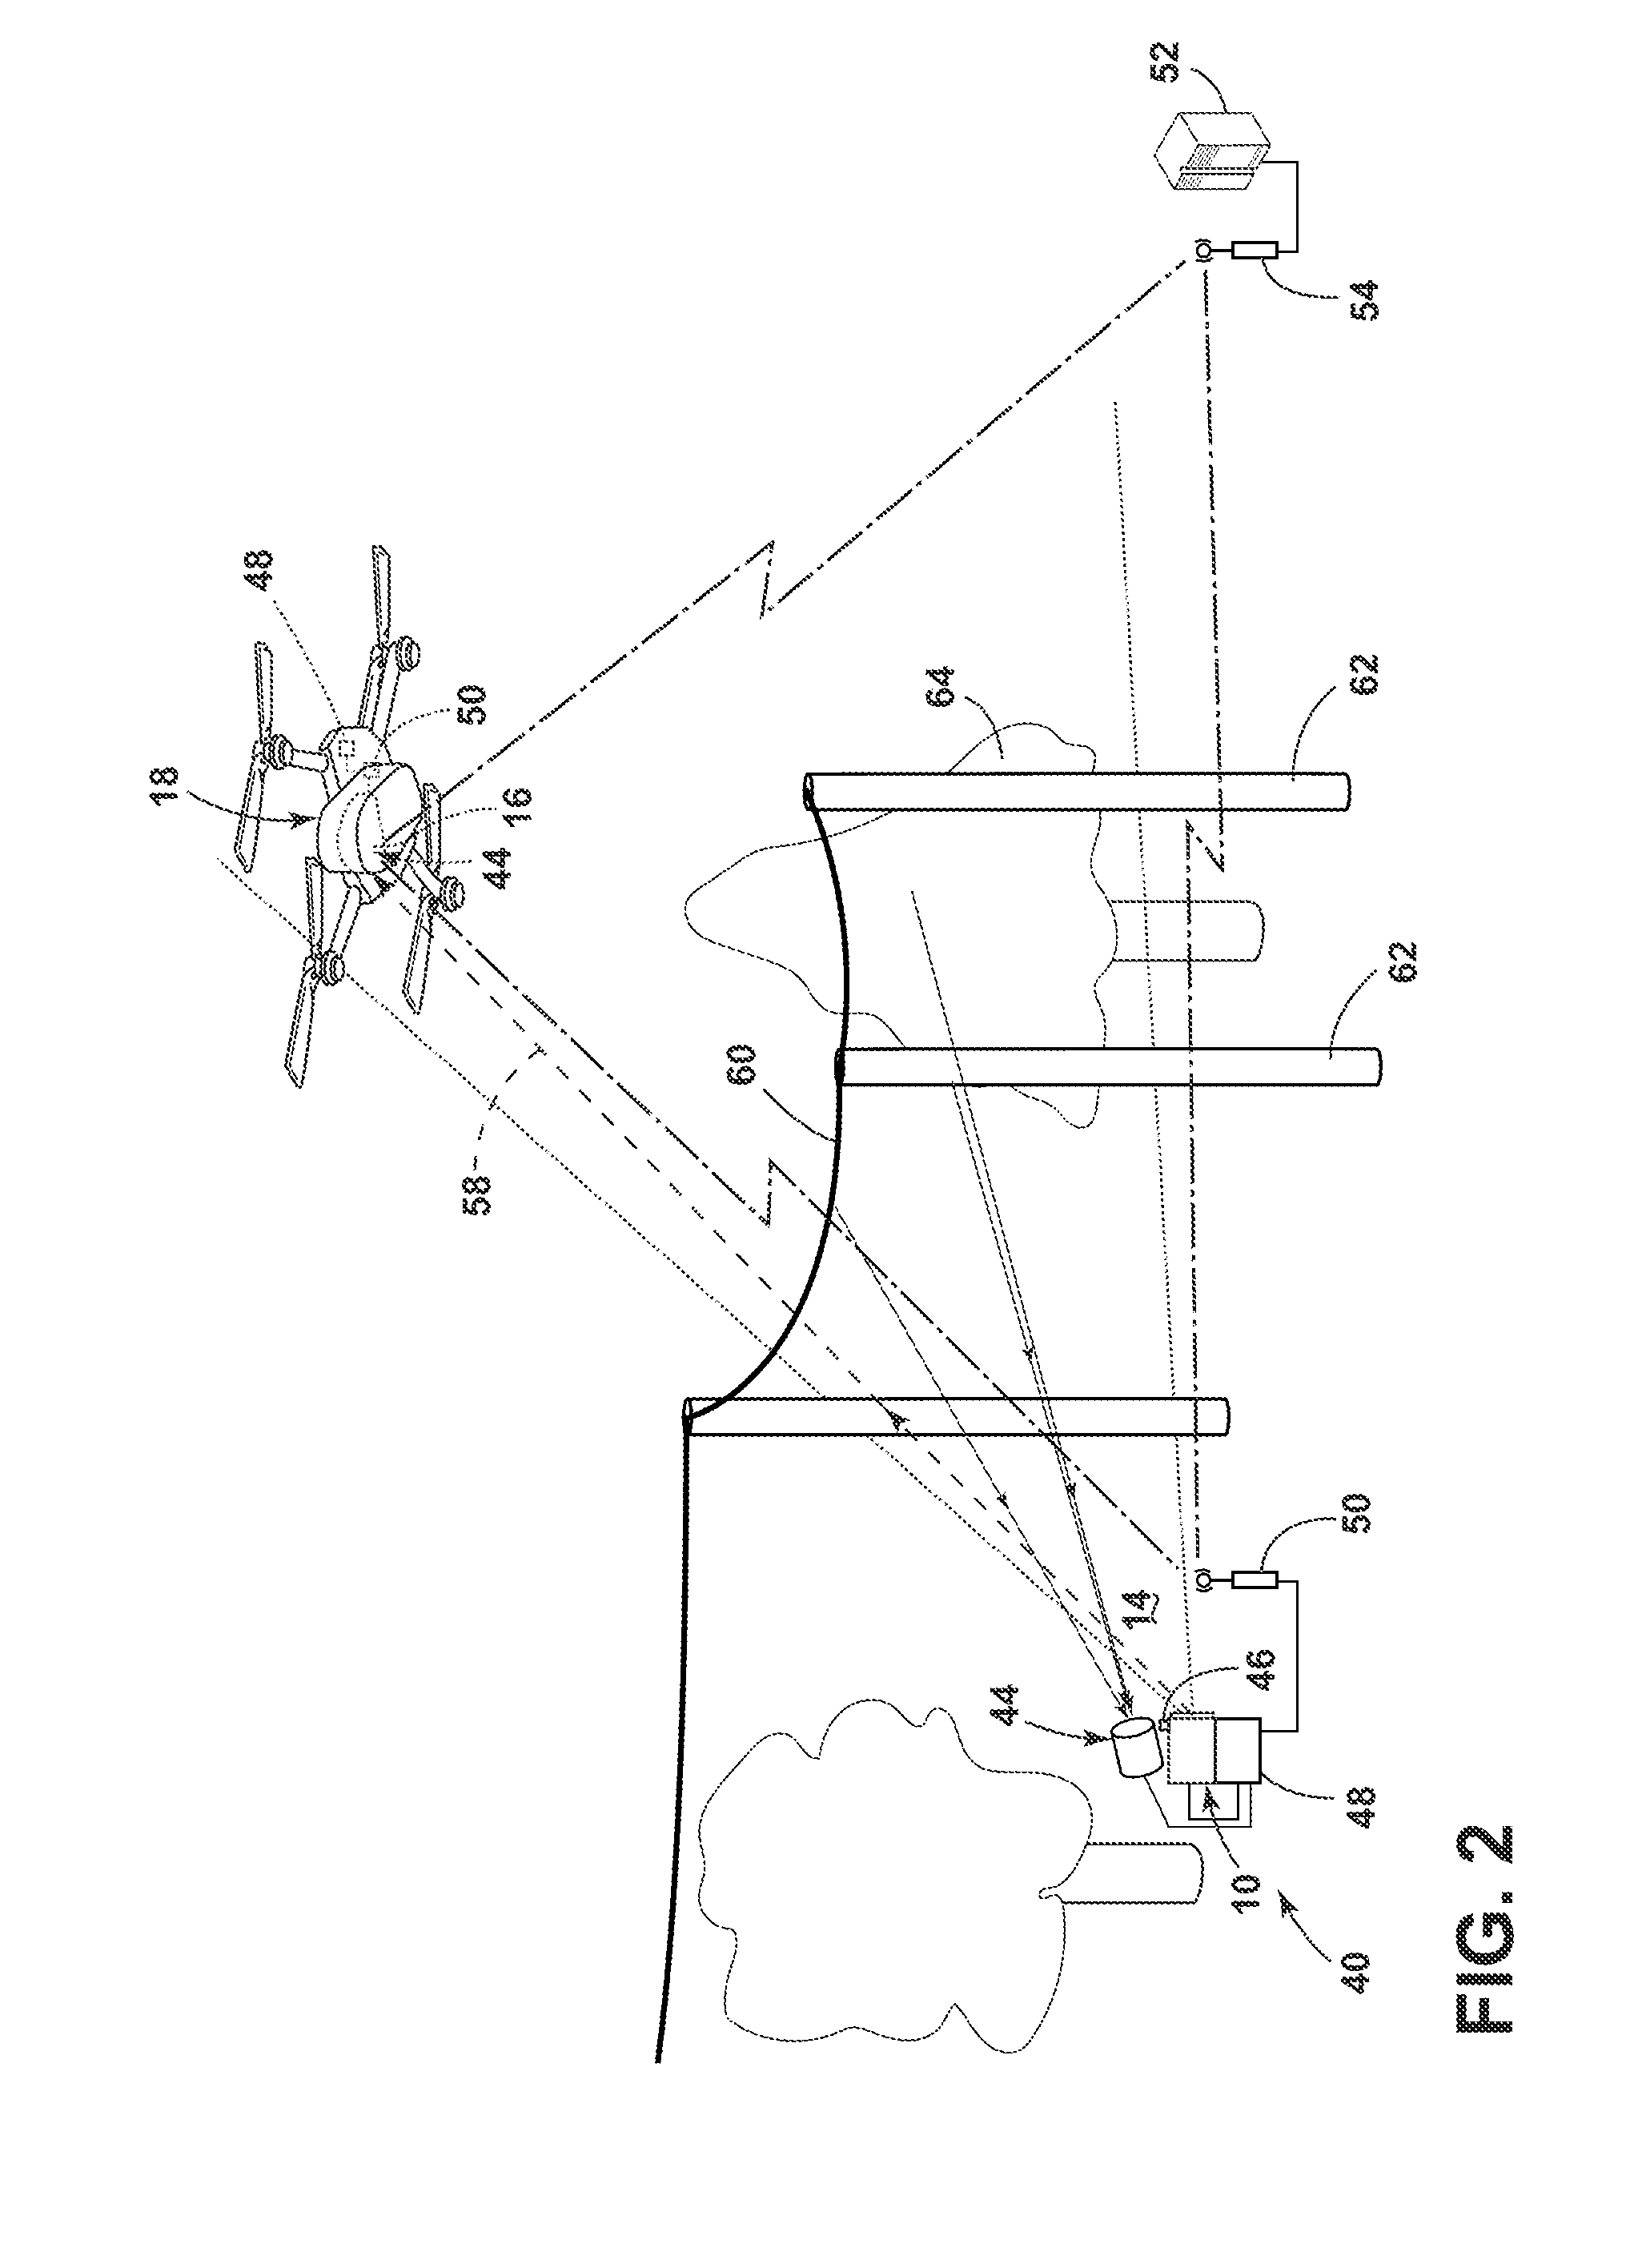 System and methods of detecting an intruding object in a relative navigation system